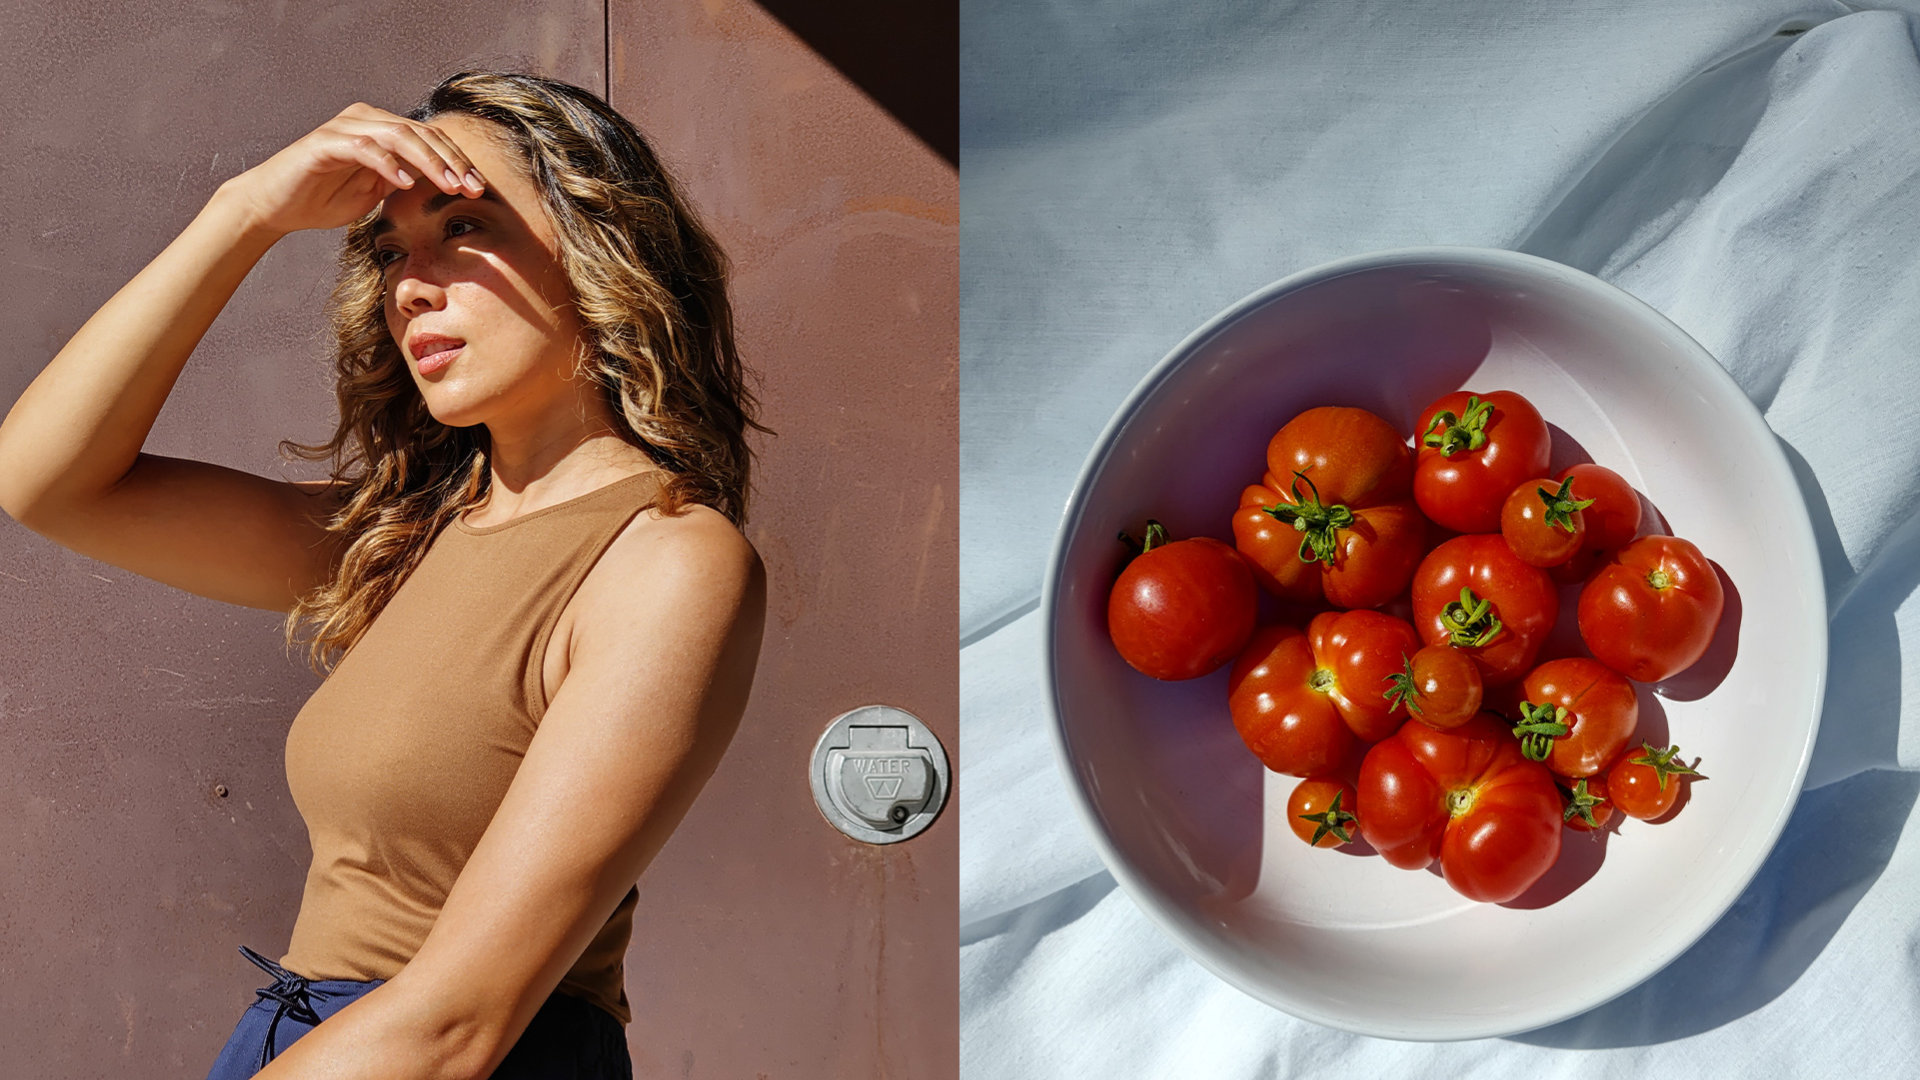 A picture of a person shielding their eyes from the sun besdie a picture of a bowl of tomatoes.